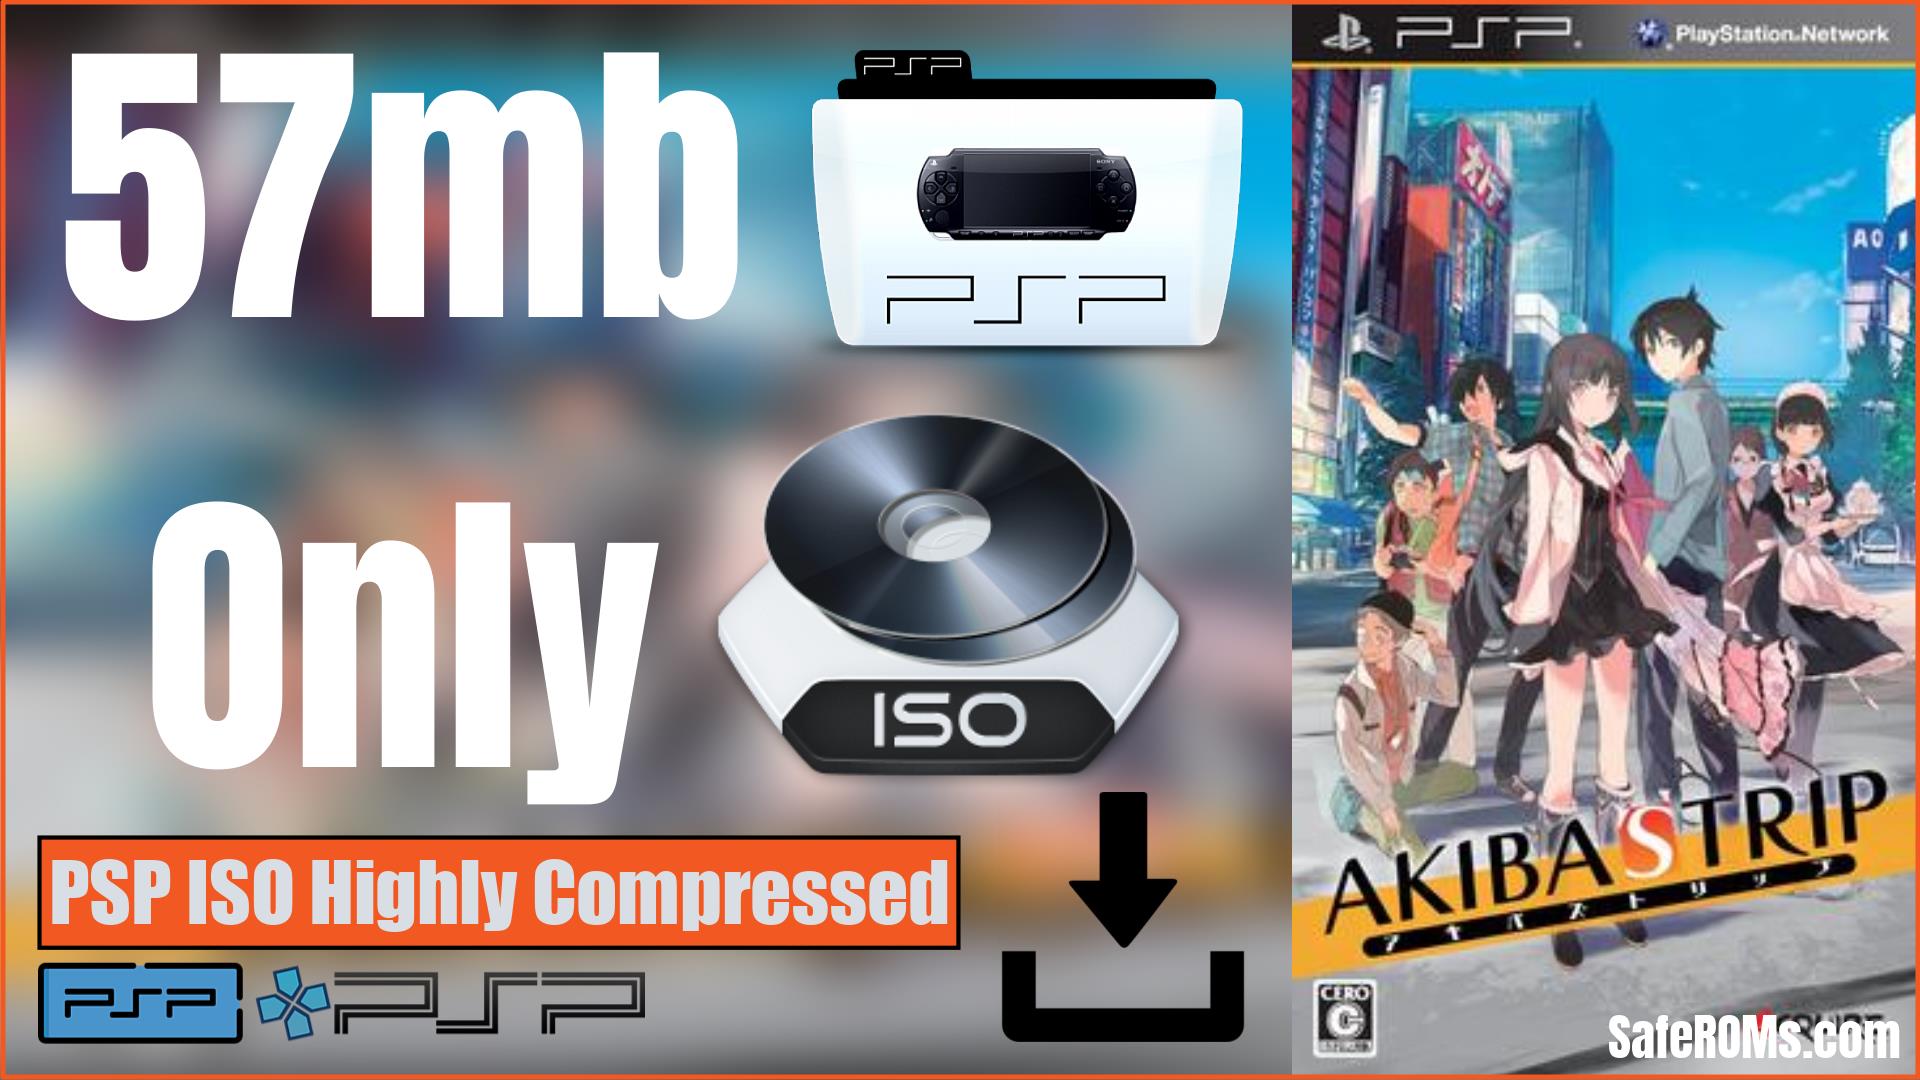 Akiba's Trip PSP ISO Highly Compressed